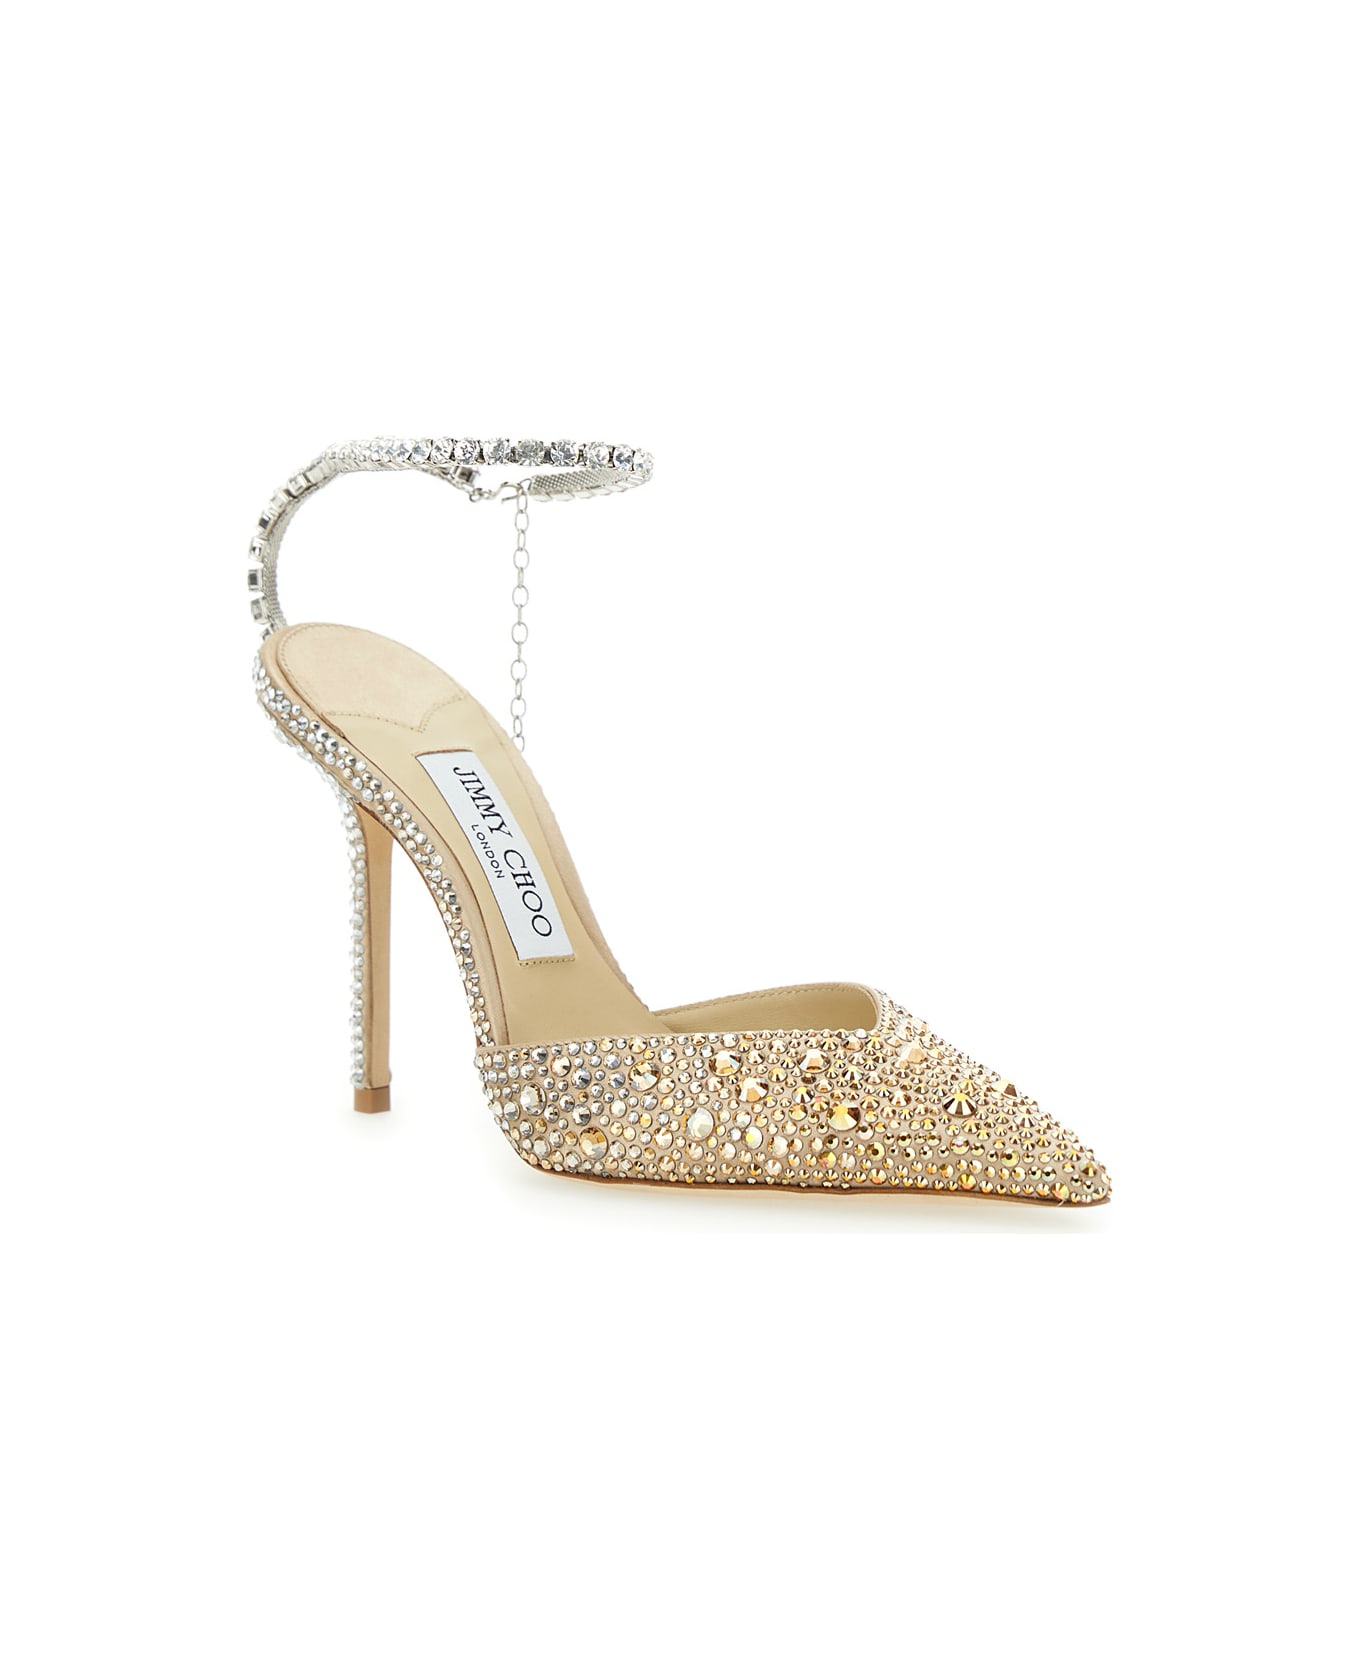 Jimmy Choo 'saeda 100' Gold Pumps With All-over Crystals In Satin Woman - Beige